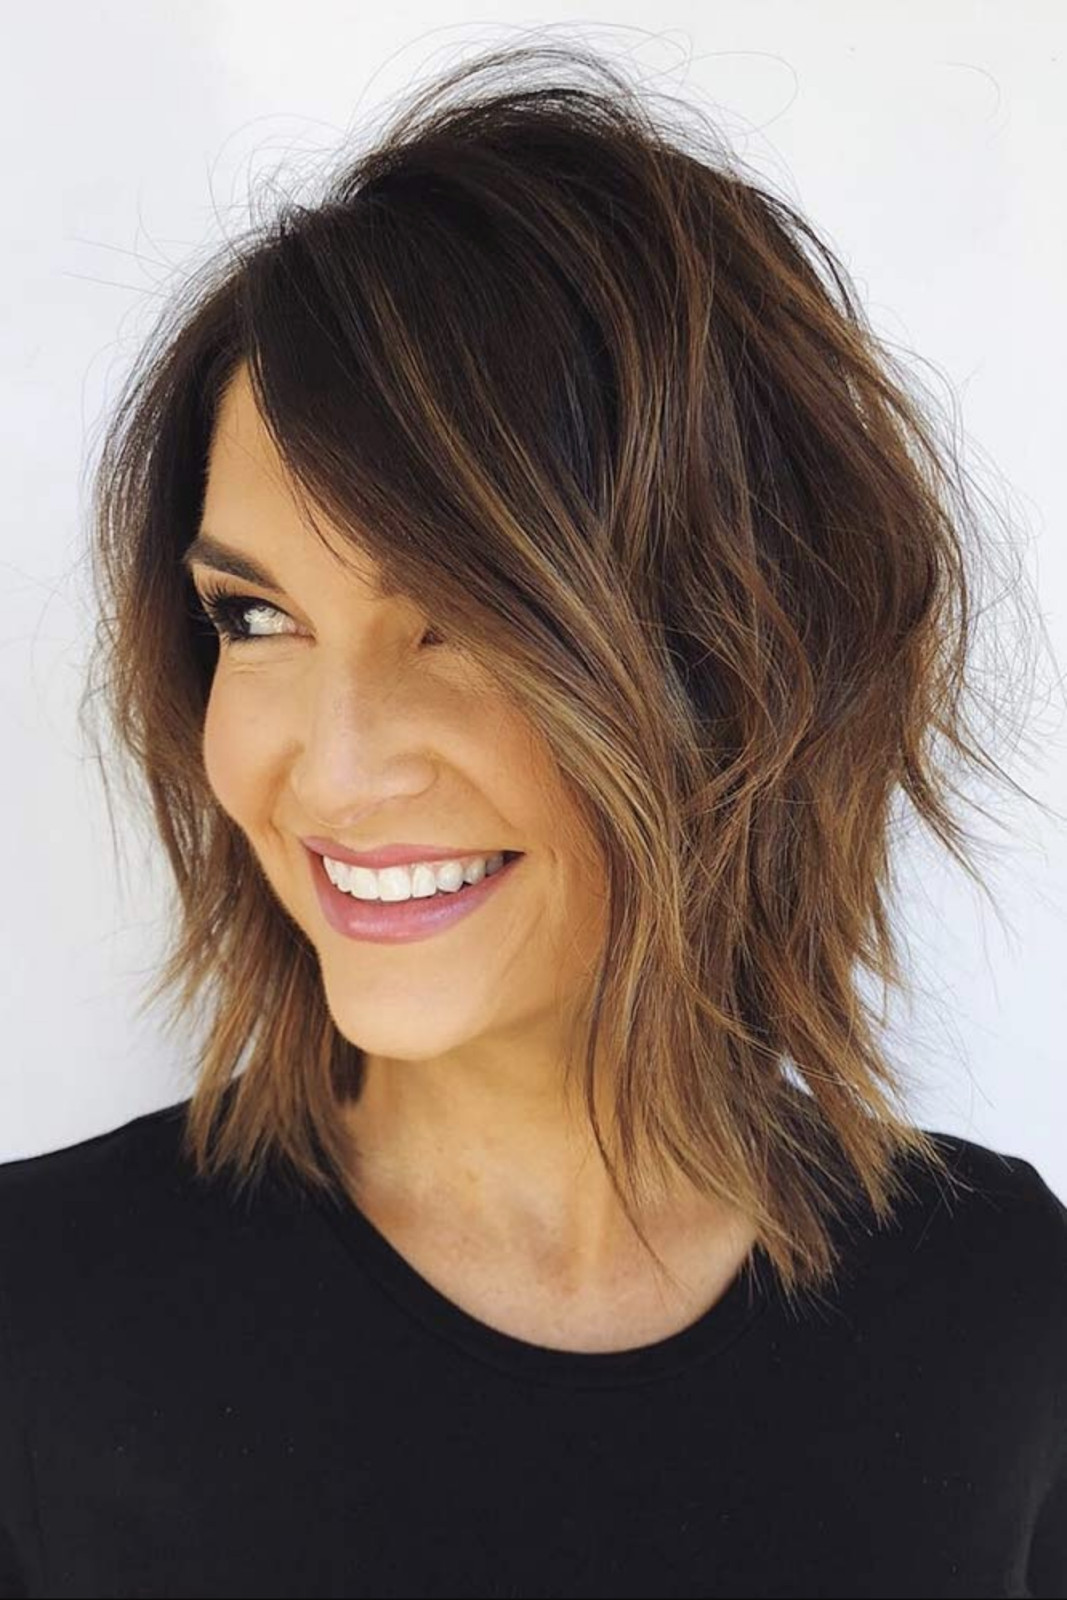 Medium Shaggy Hairstyles 2020
 2019 2020 Short Hairstyles for Women Over 50 That Are